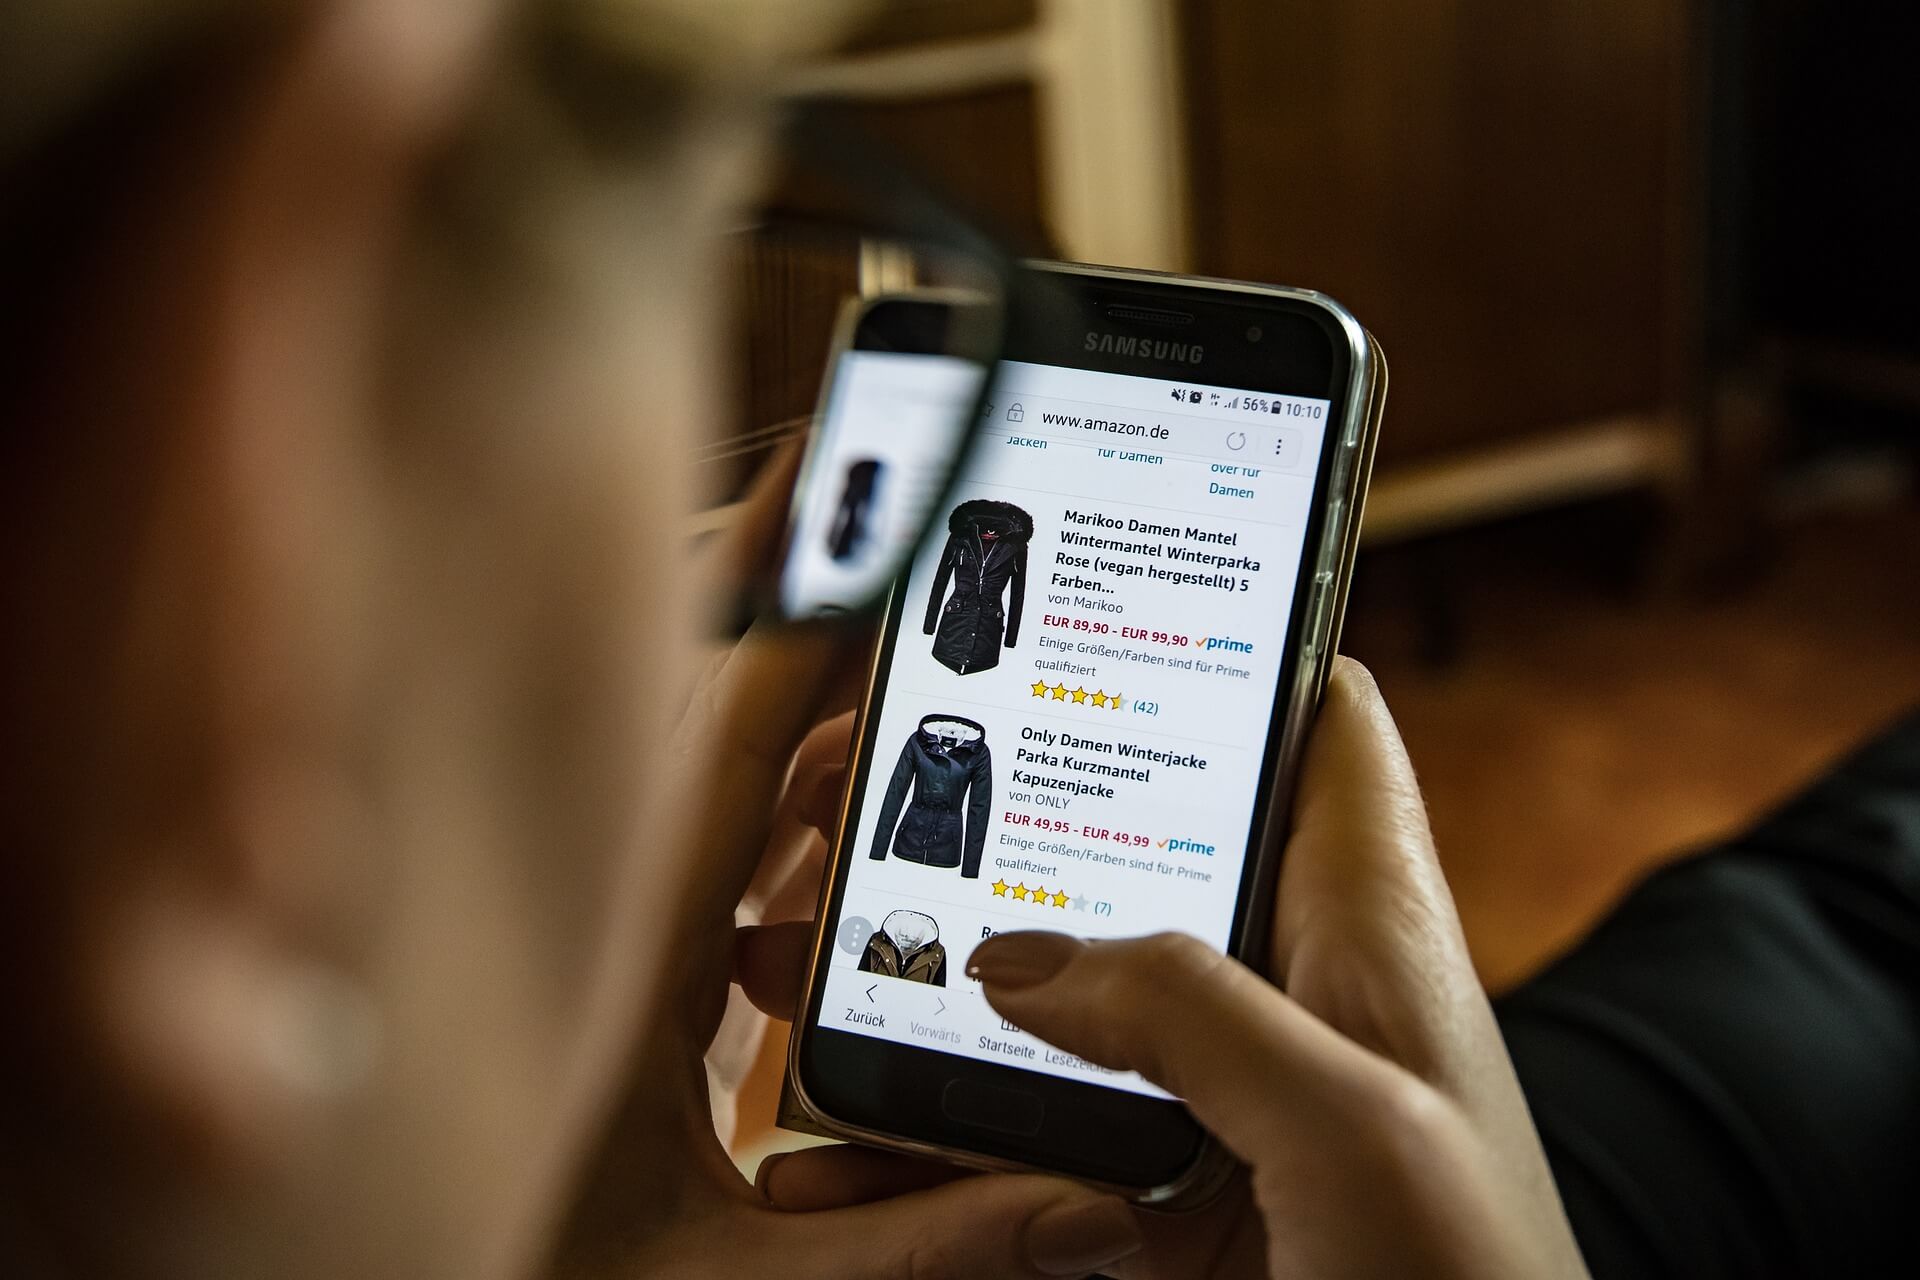 20 Optimization Tips for Ecommerce Product Page Design and Testing